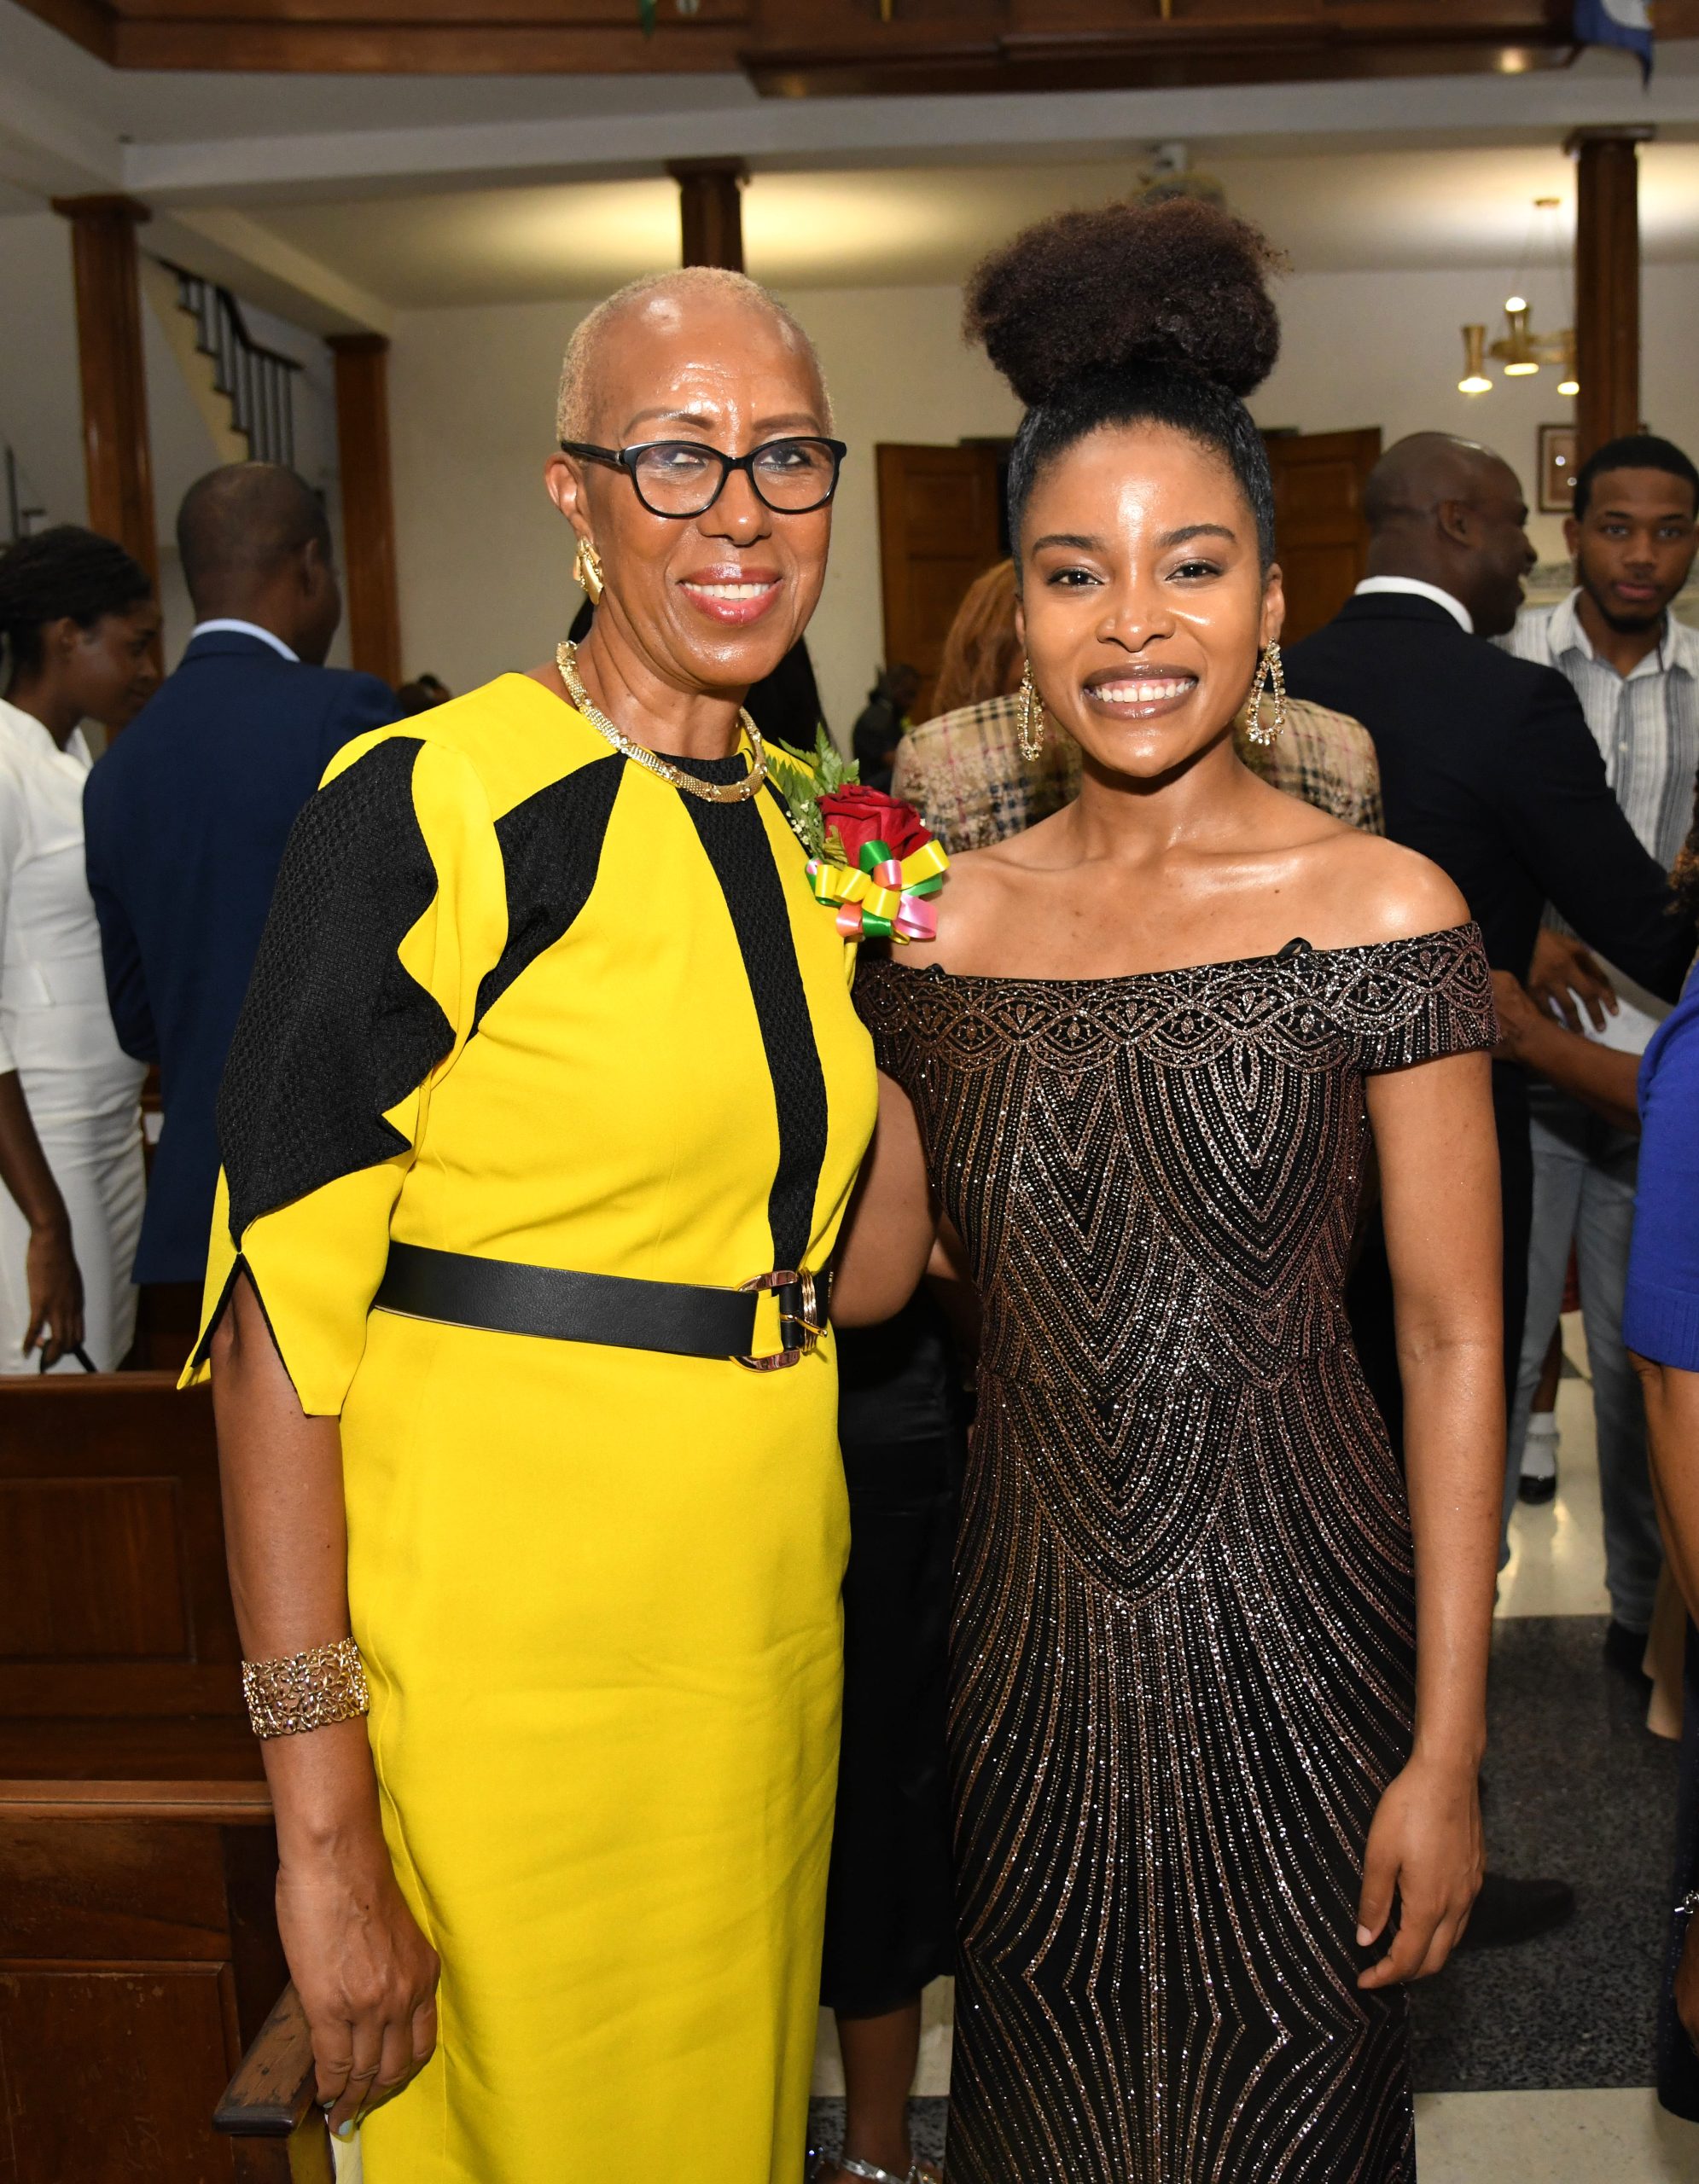 Minister of Education and Youth, Hon. Fayval Williams and Soprano, Sashekia Brown at the CHASE Fund 20th Anniversary Concert.